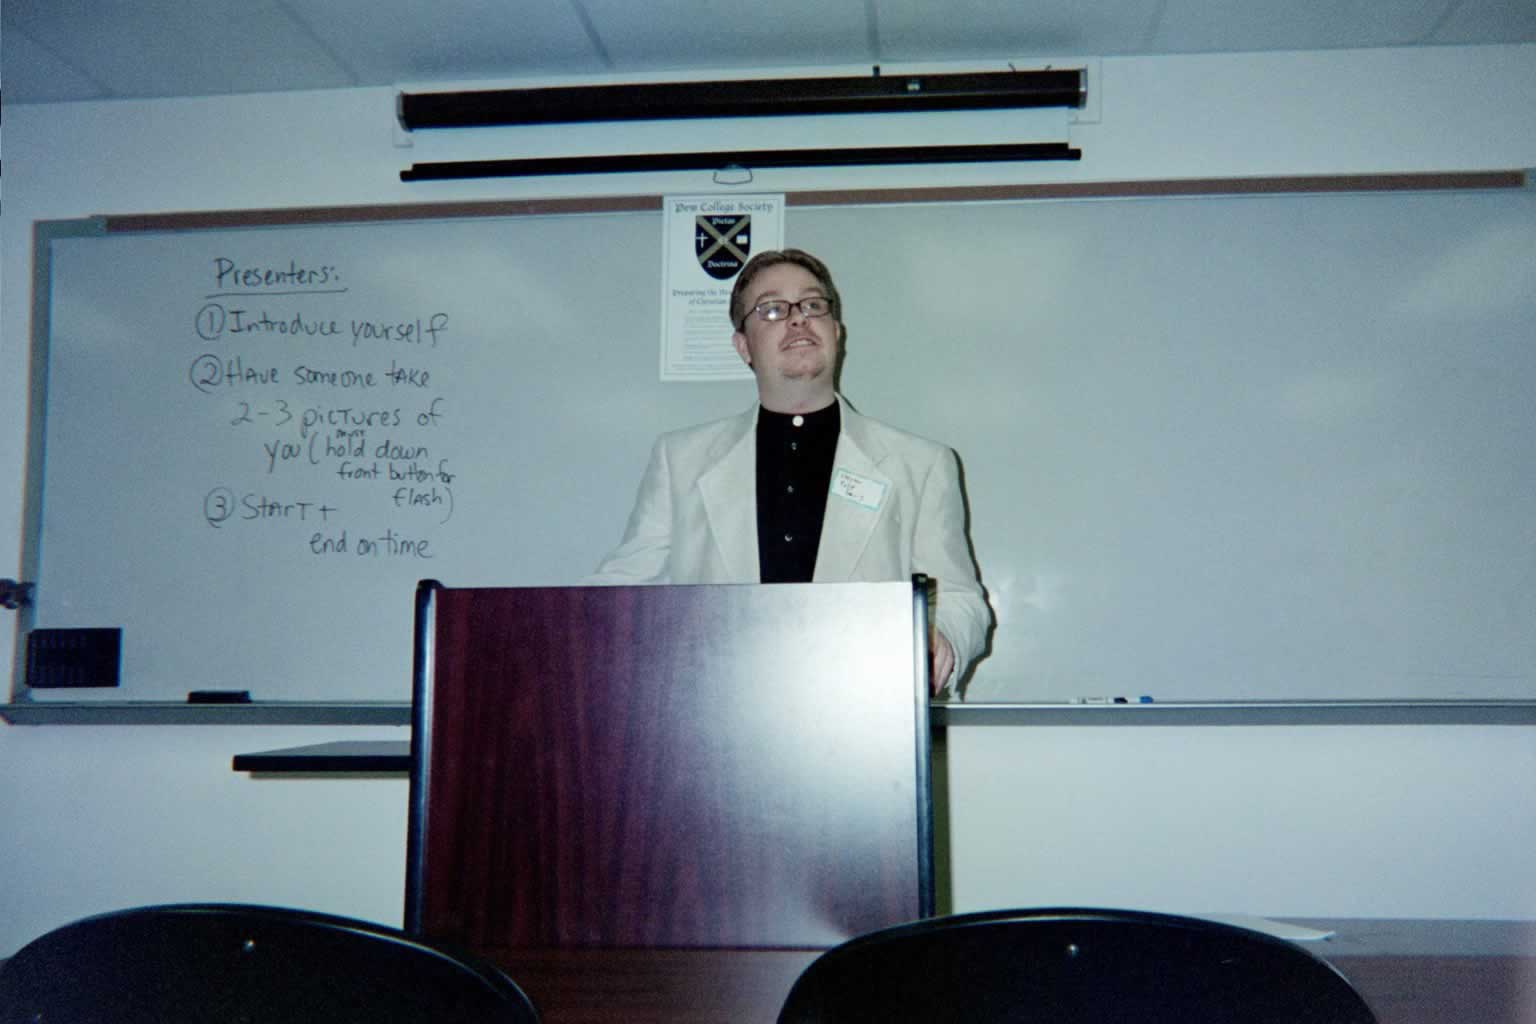 picture of a man wearing glasses standing behind a podium talking